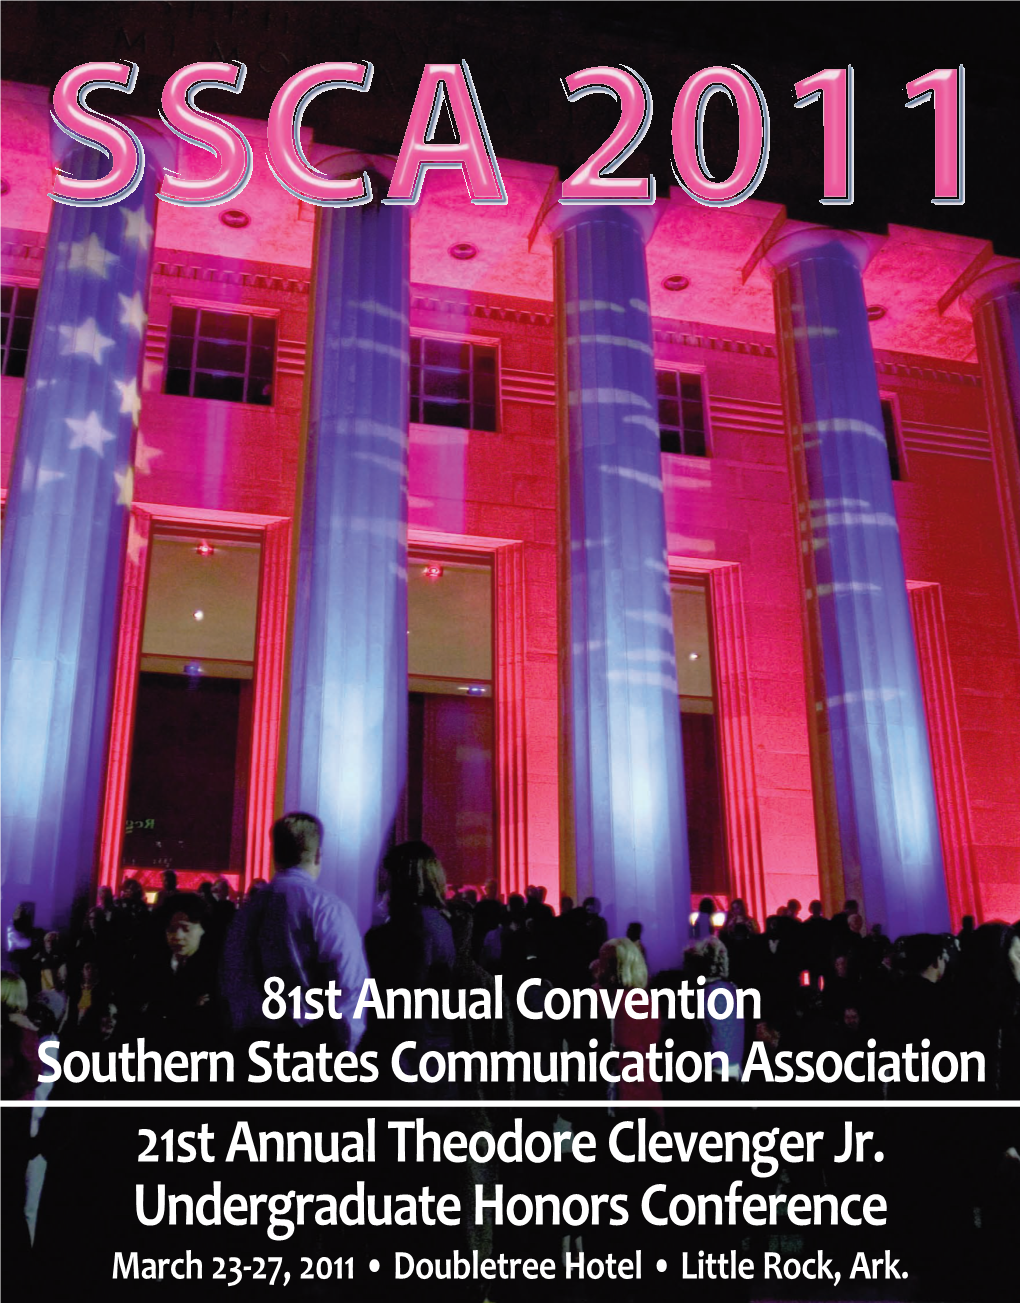 21St Annual Theodore Clevenger Jr. Undergraduate Honors Conference 81St Annual Convention Southern States Communication Associat